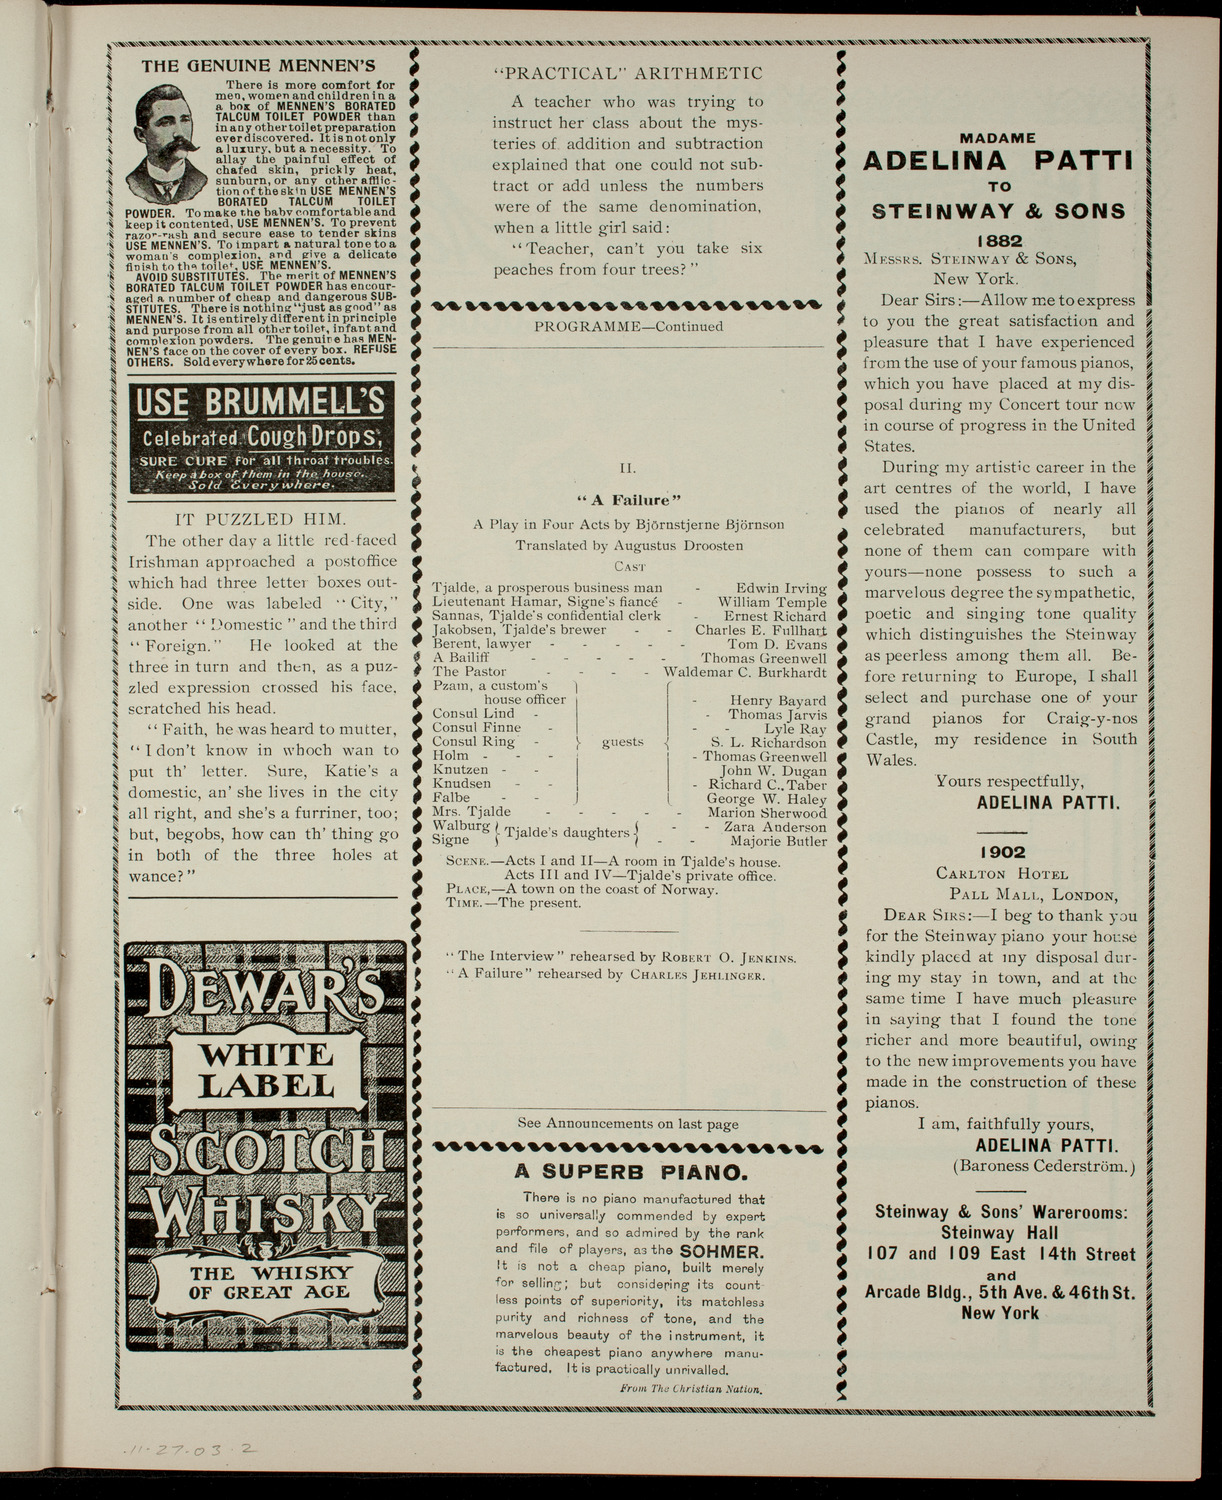 Academy Stock Company of the American Academy of Dramatic Arts/Empire Theatre Dramatic School, November 27, 1903, program page 3